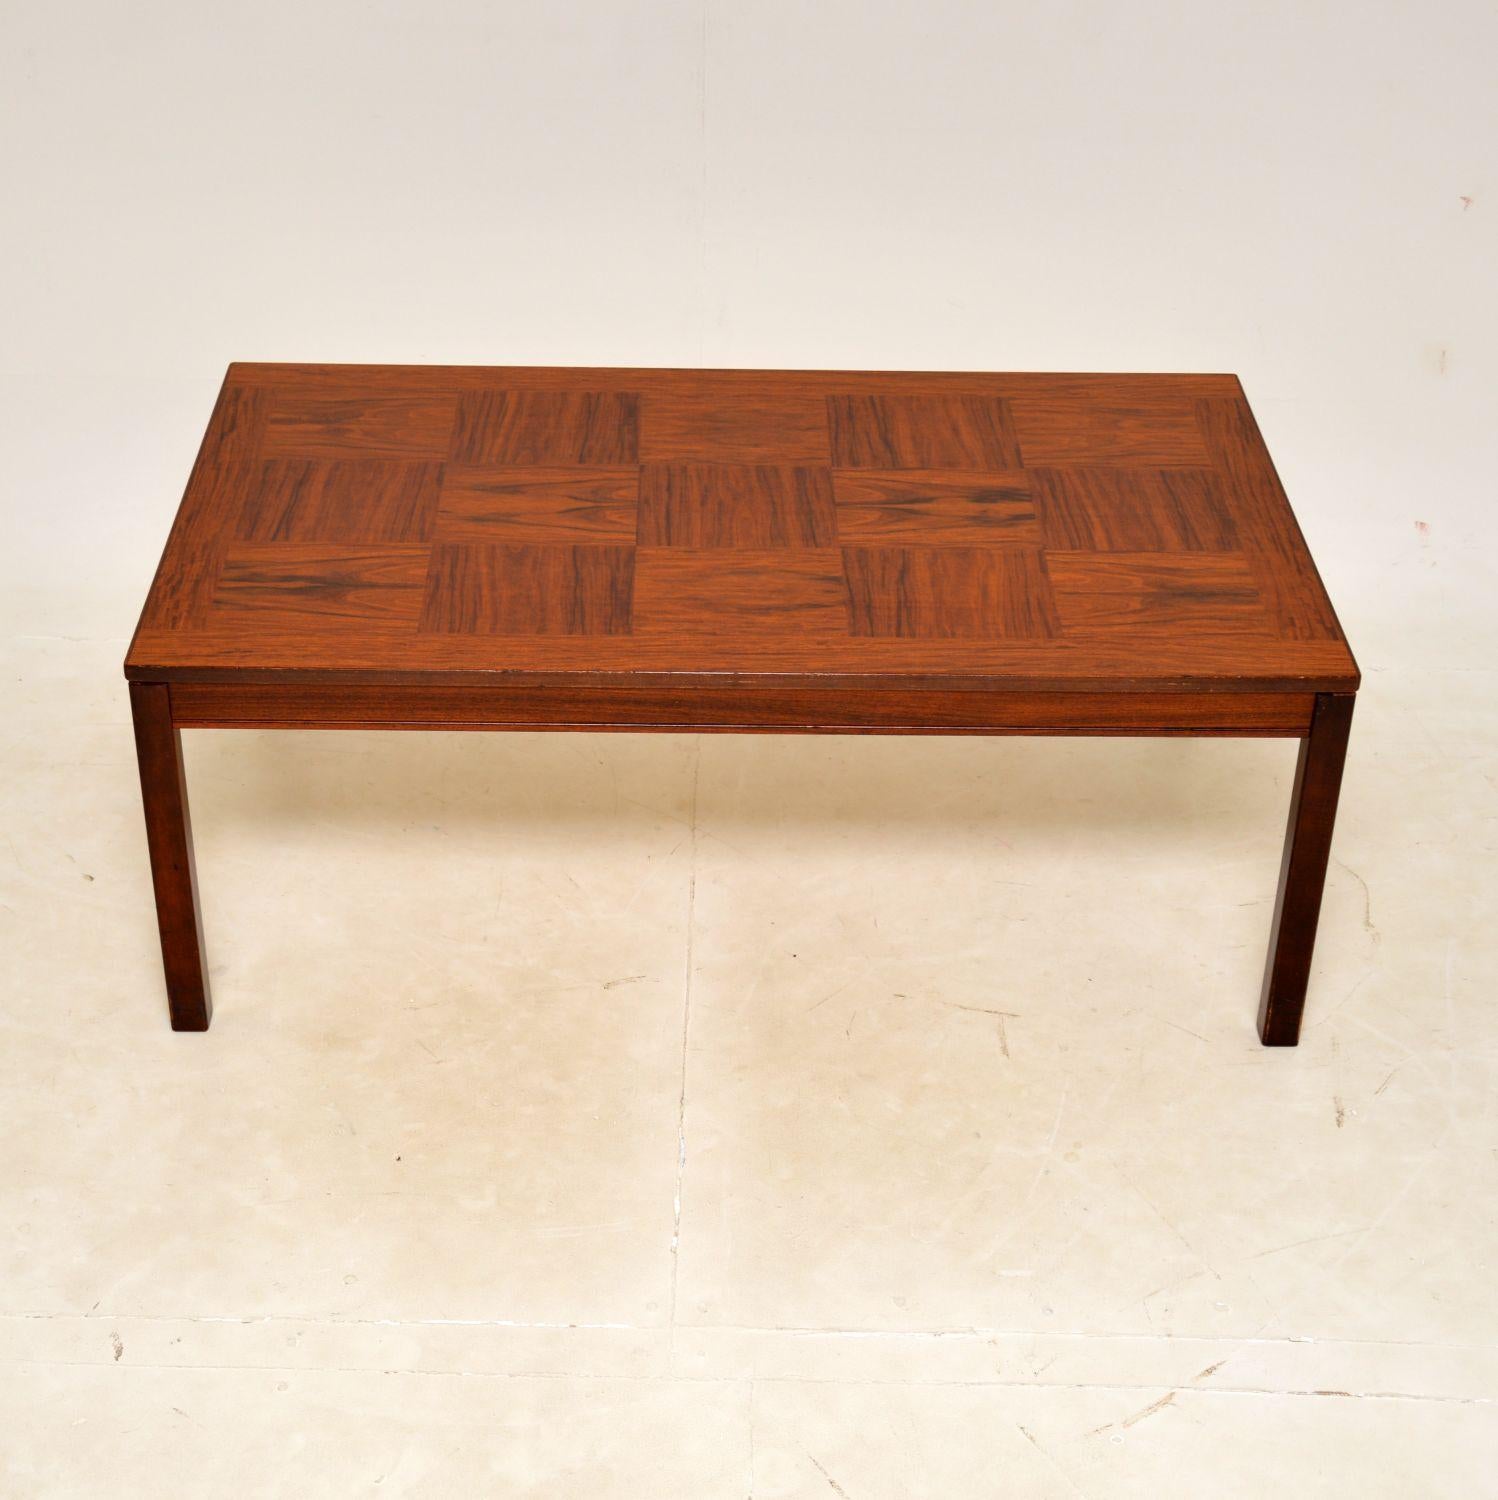 A large and impressive vintage coffee table. This was made in Norway by Heggen, it dates from the 1970s.

It is of superb quality, with a gorgeous parquetry design. The wood has a lovely colour and beautiful grain patterns. The legs can unbolt and